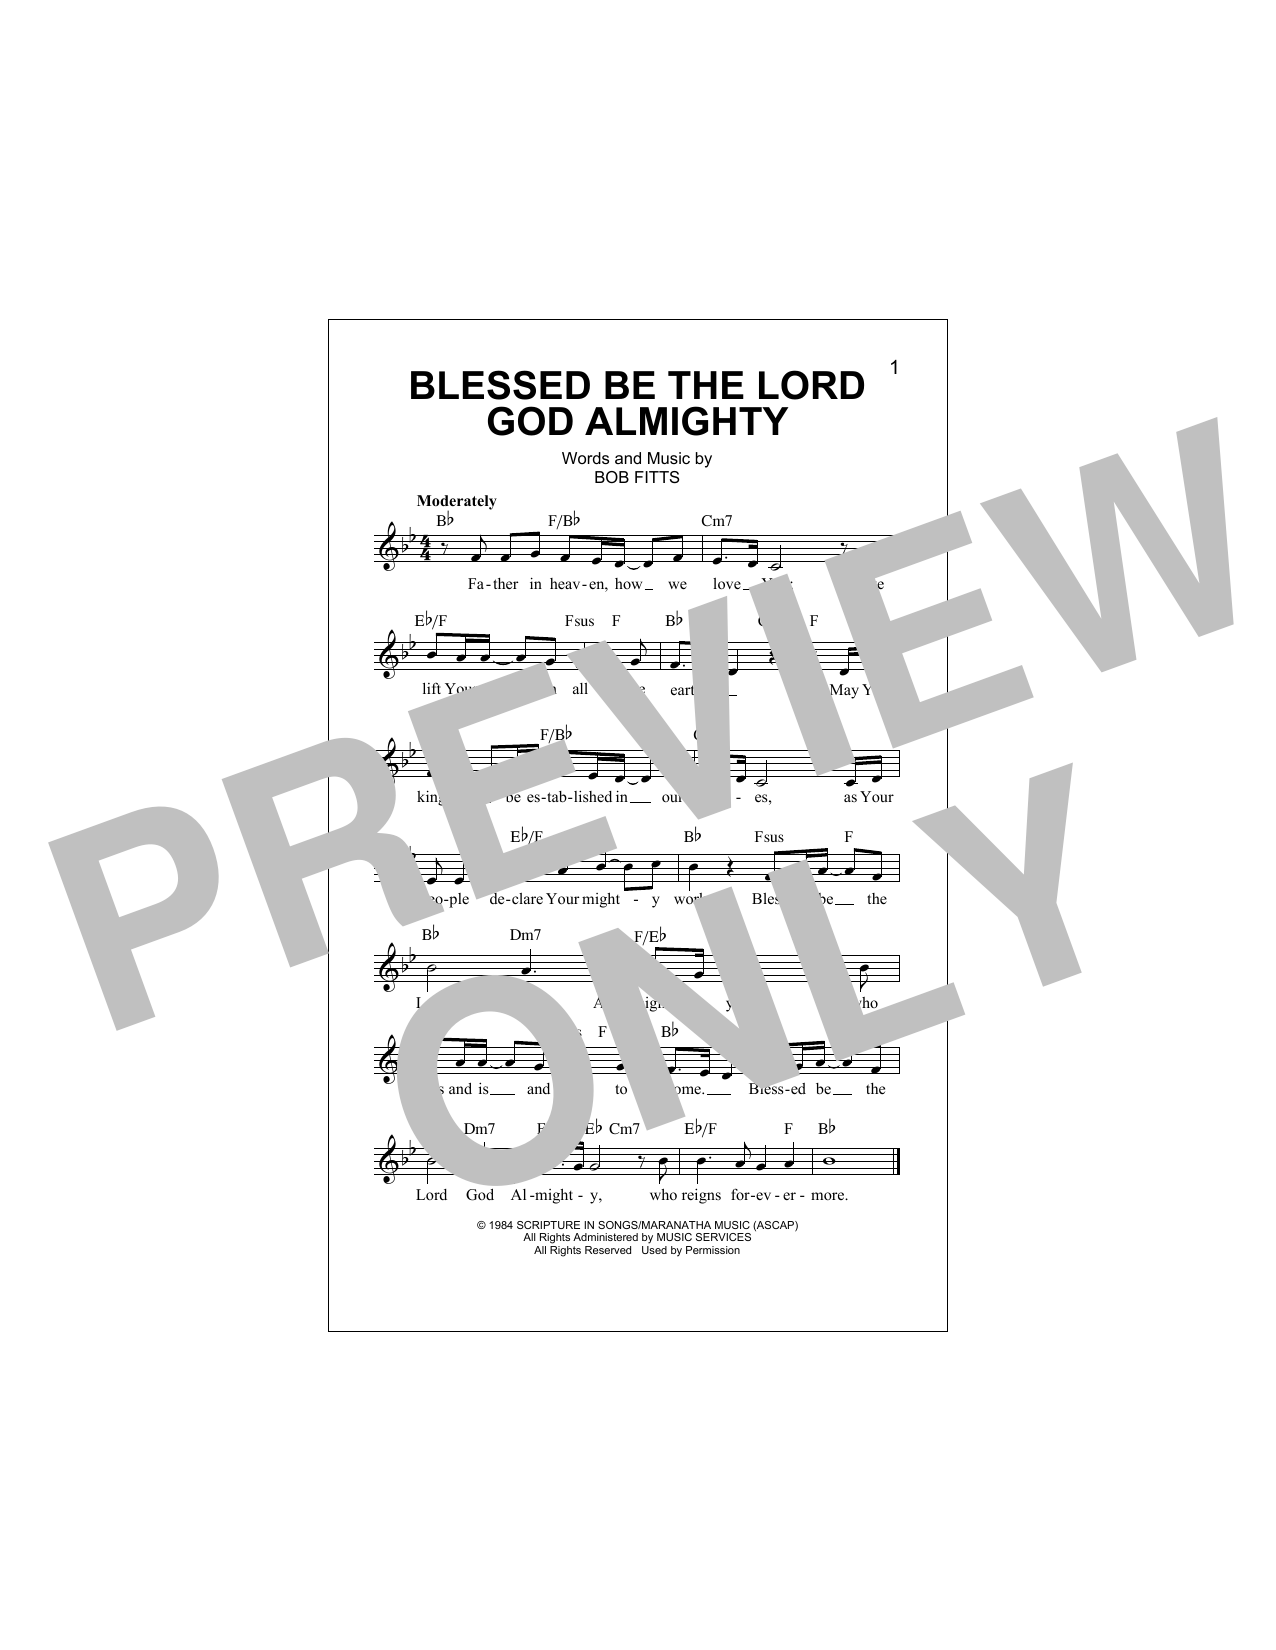 Download Robert D. Fitts Blessed Be The Lord God Almighty Sheet Music